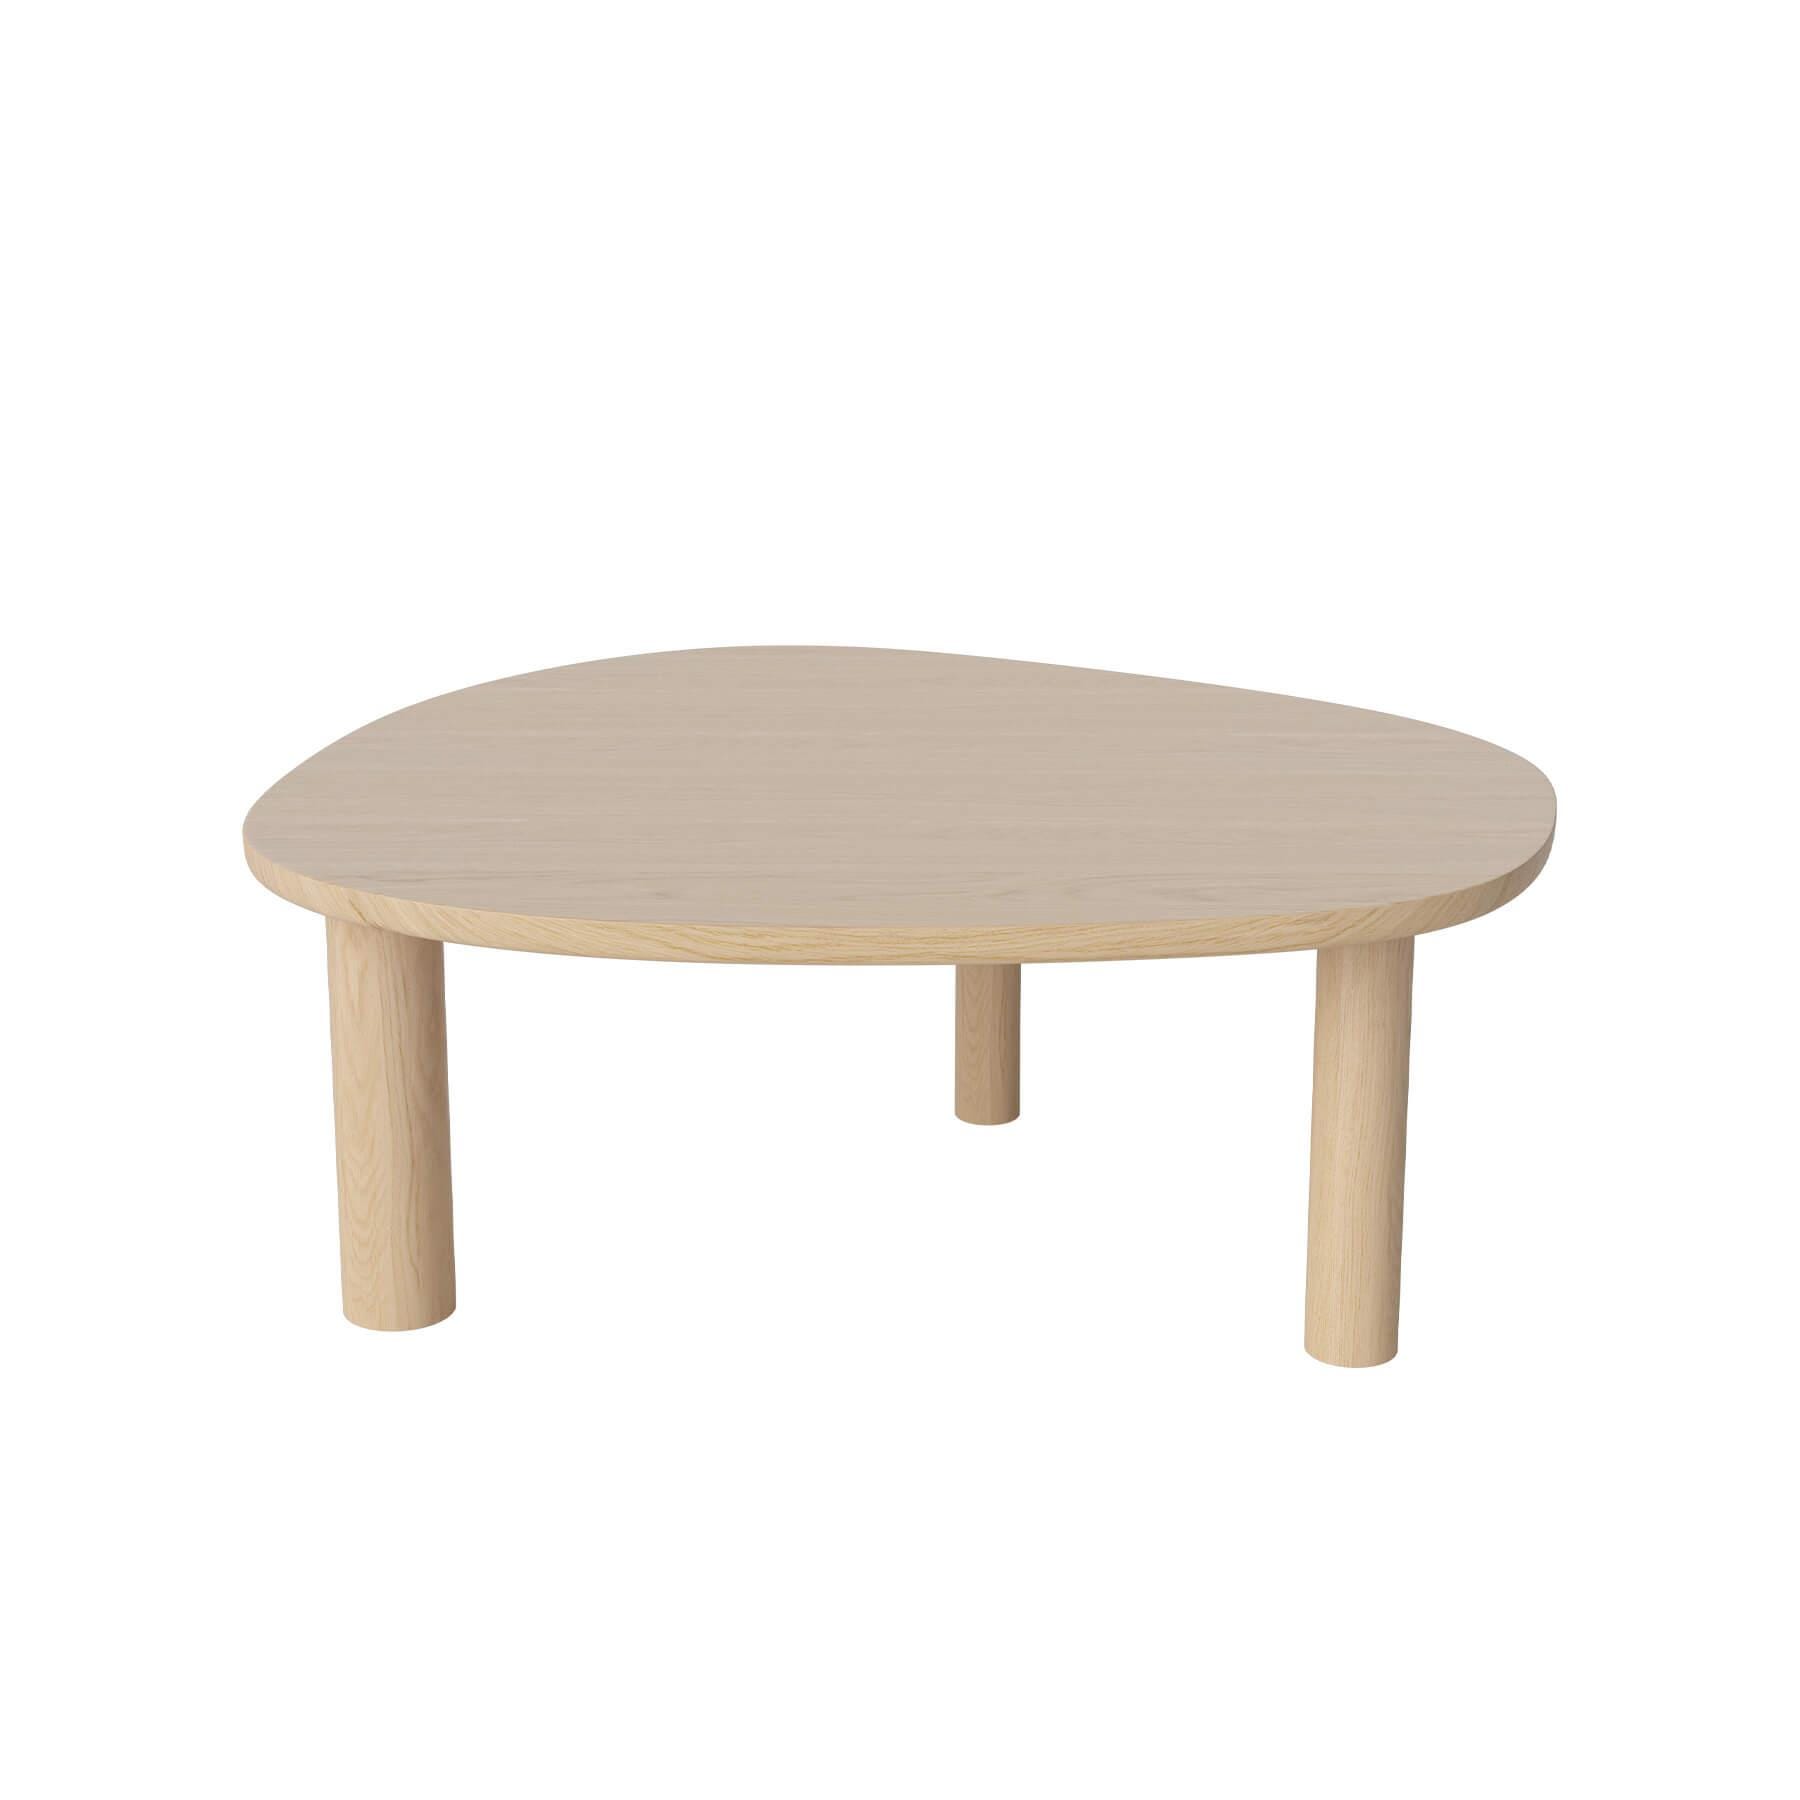 Bolia Latch Coffee Table Single White Oiled Oak Light Wood Designer Furniture From Holloways Of Ludlow